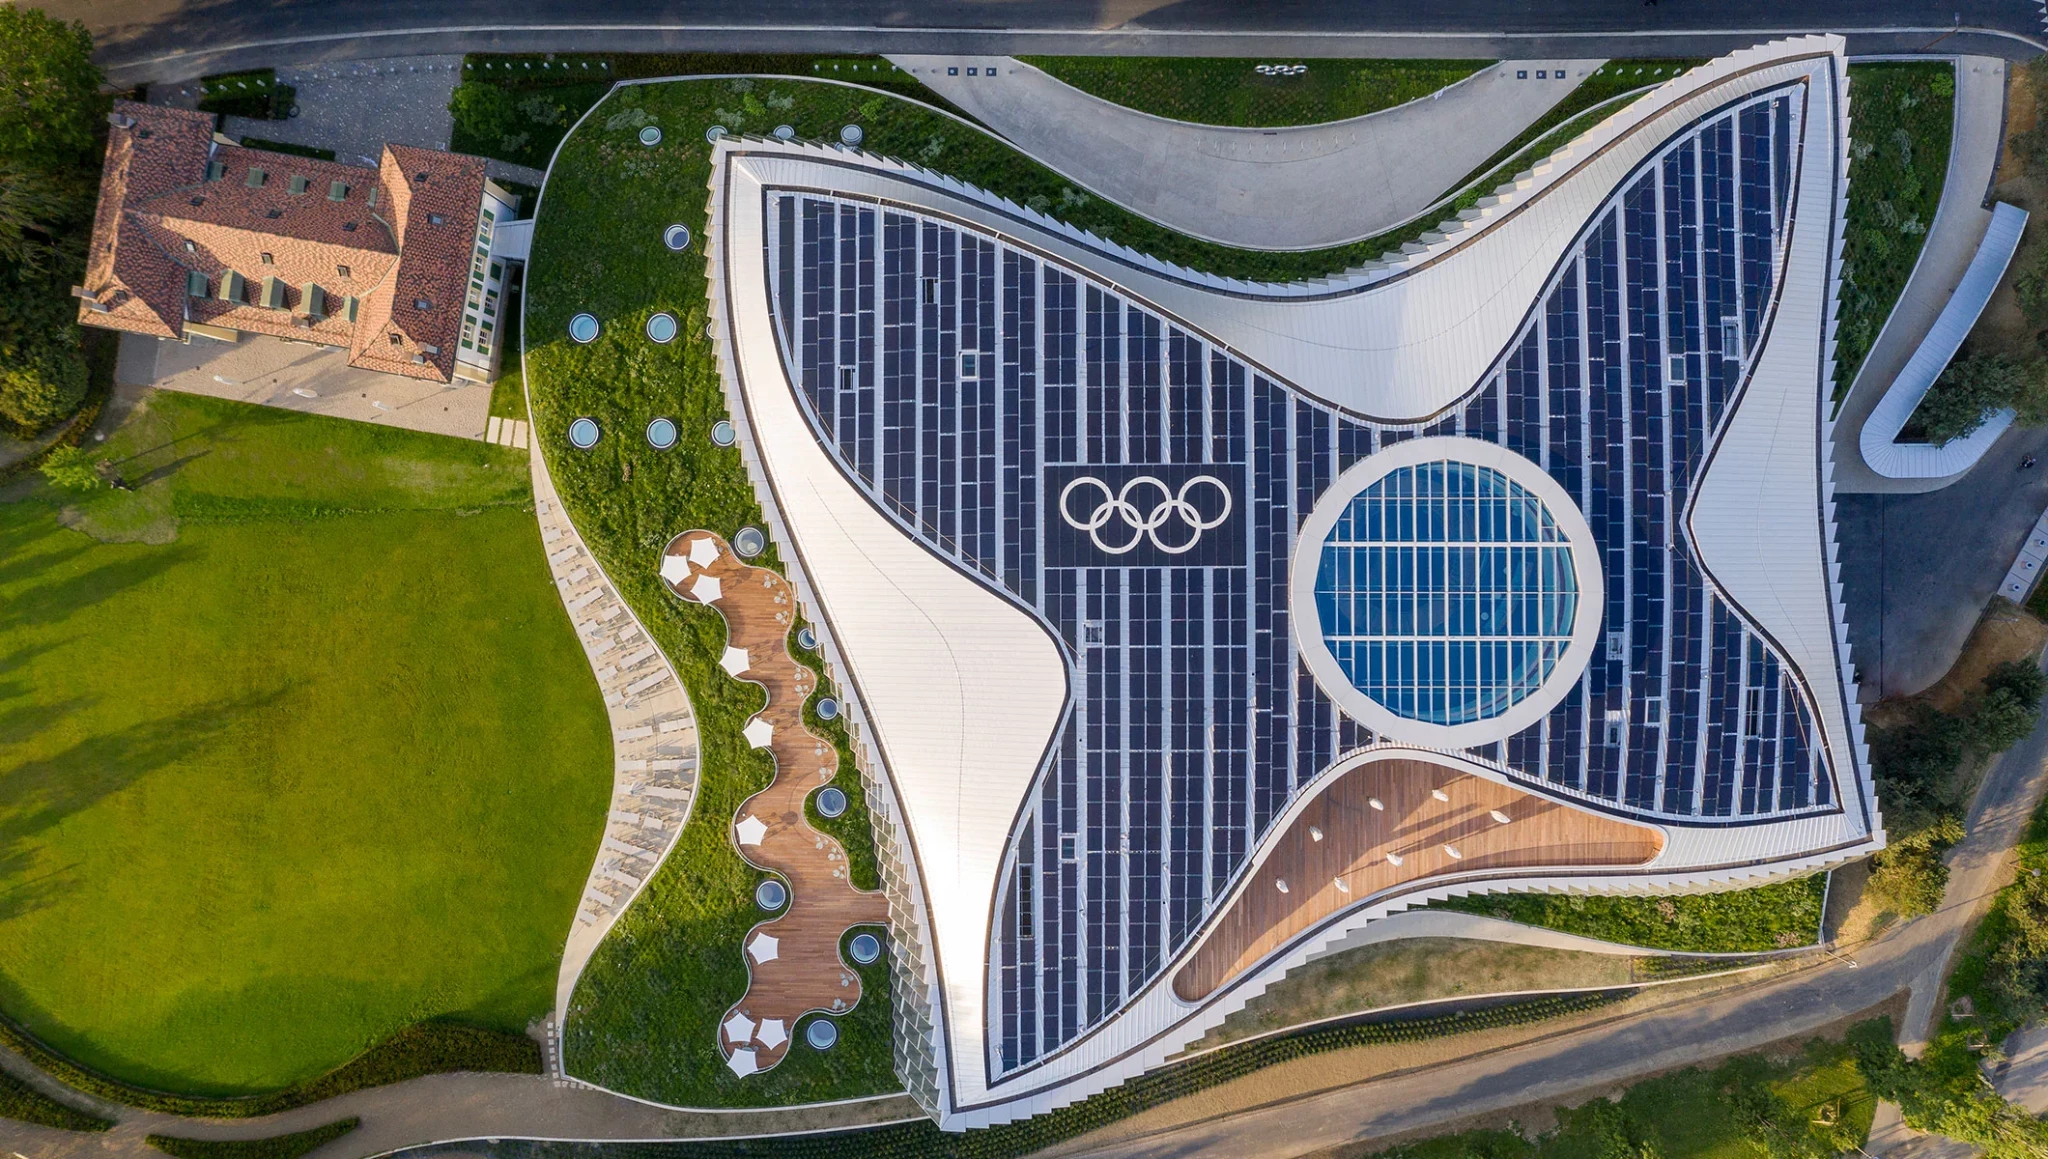 The International Olympic Committee's efforts at promoting sustainability have been recognised with ISO certification ©IOC